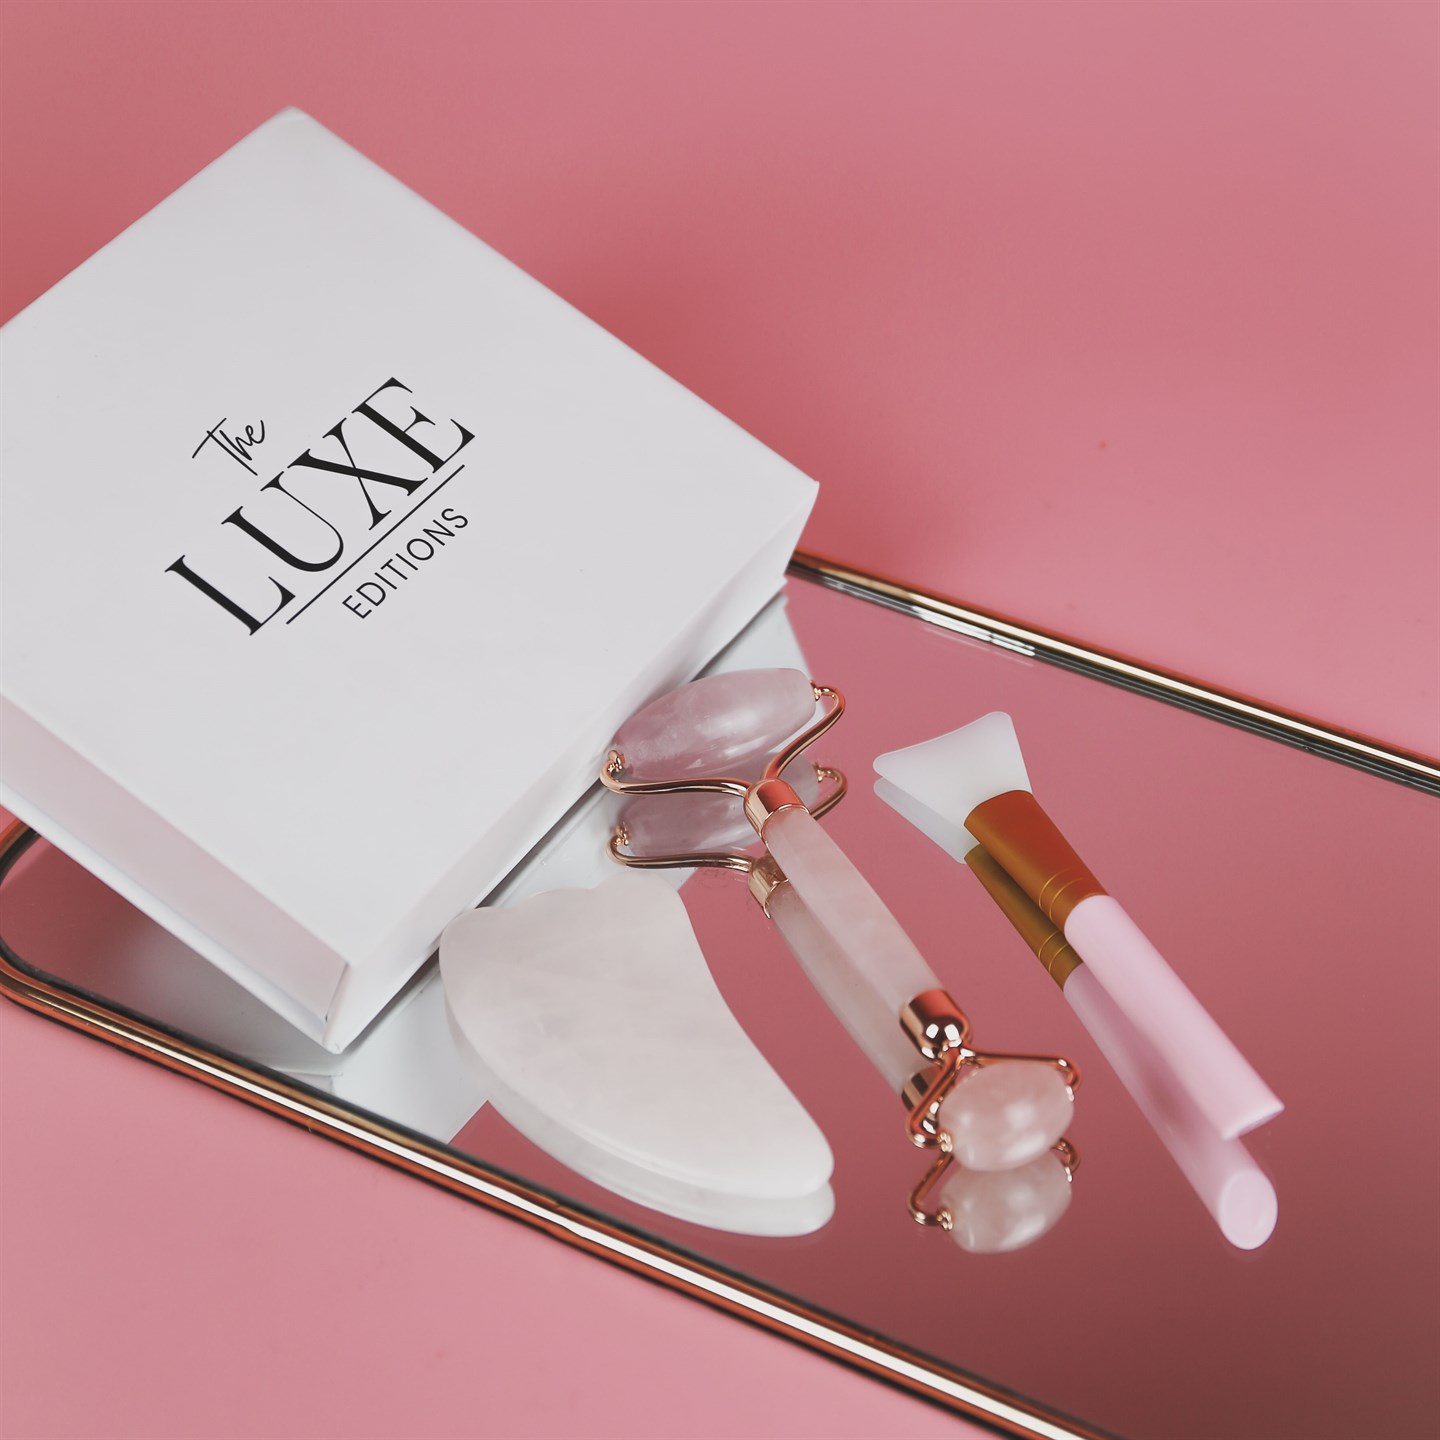 The Luxe Editions Beauty Tool Kit